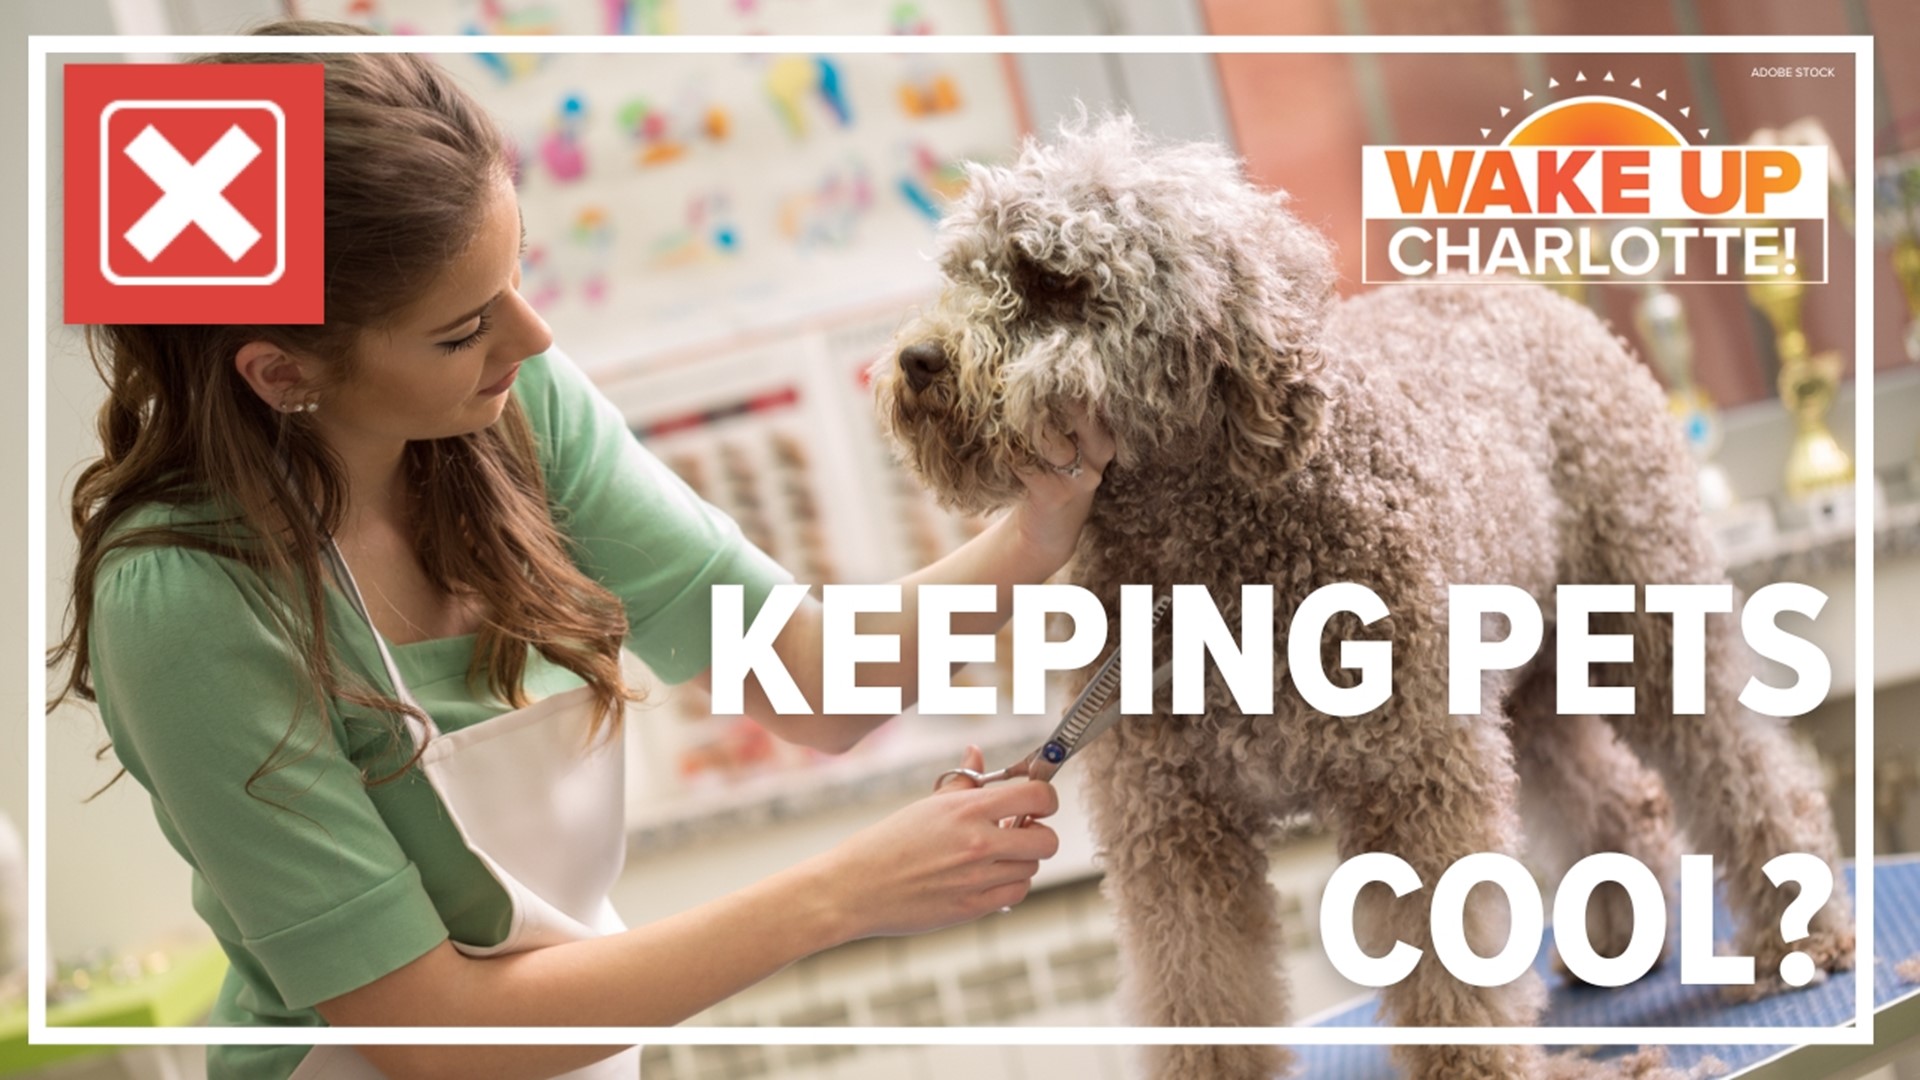 We all want to keep our pets cool during the summer, but is shaving them the way to go? Let's verify.